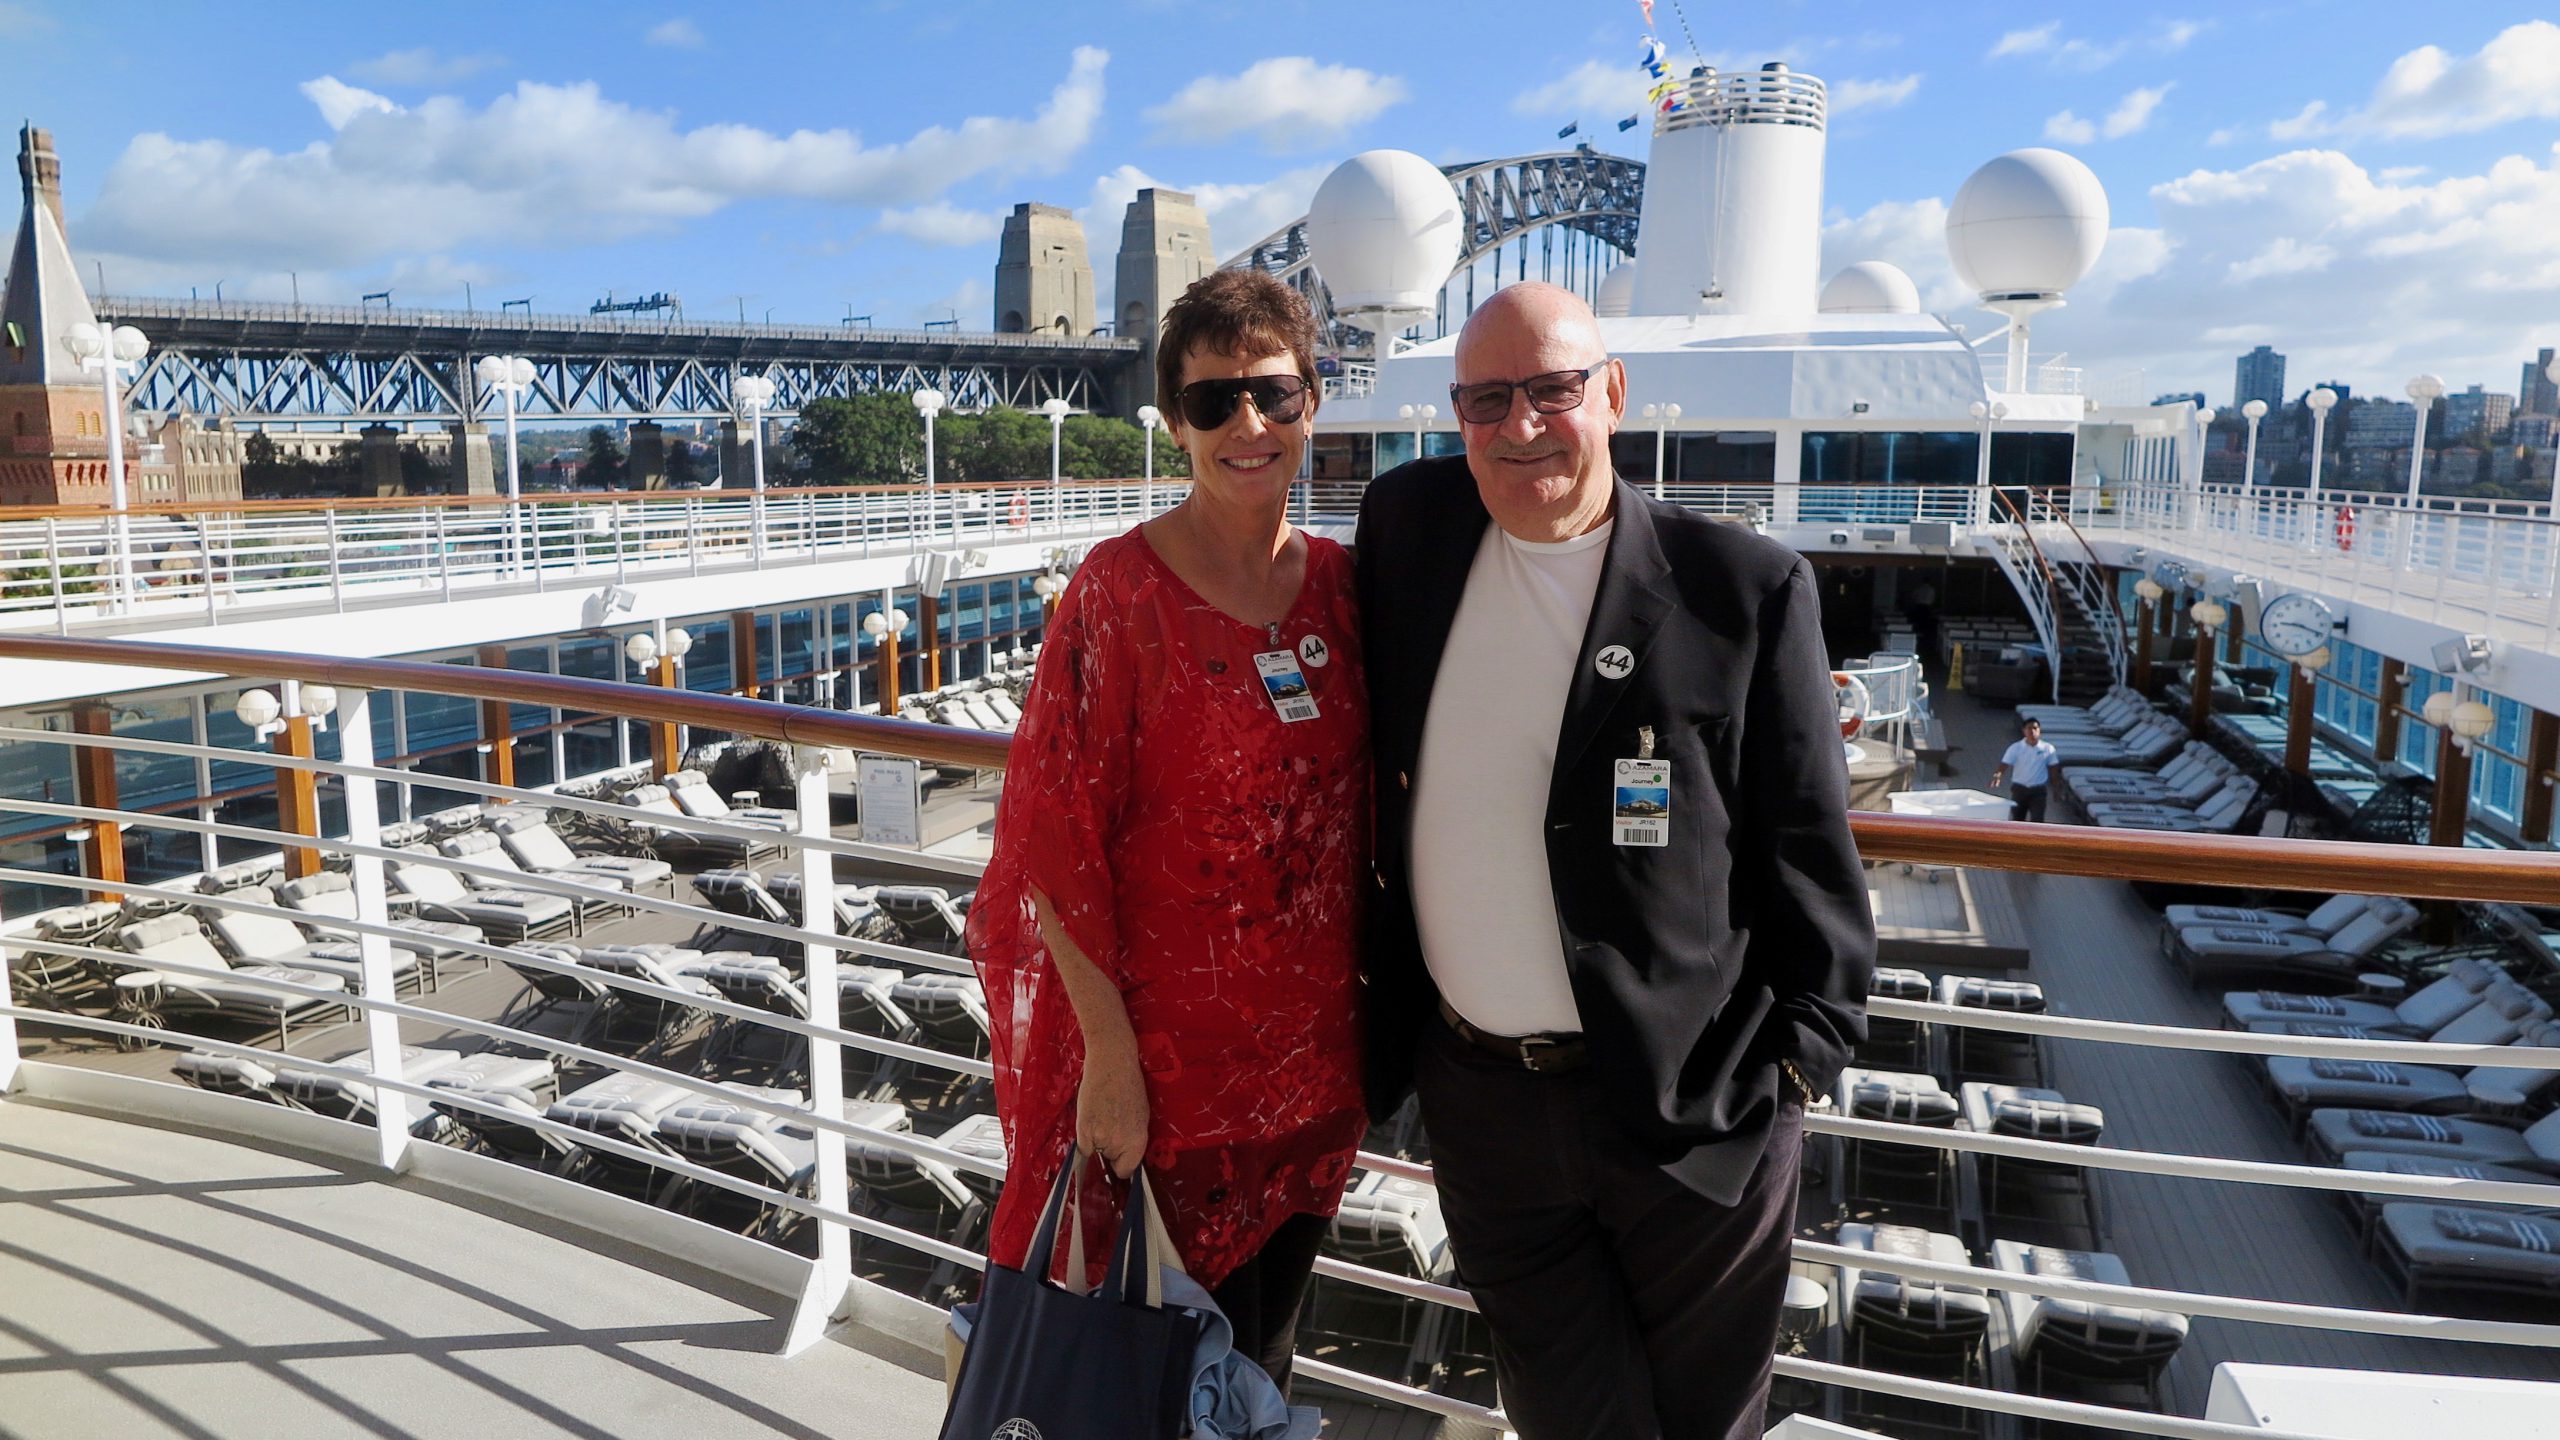 The first-timers who bought a $200,000 round-the-world-cruise